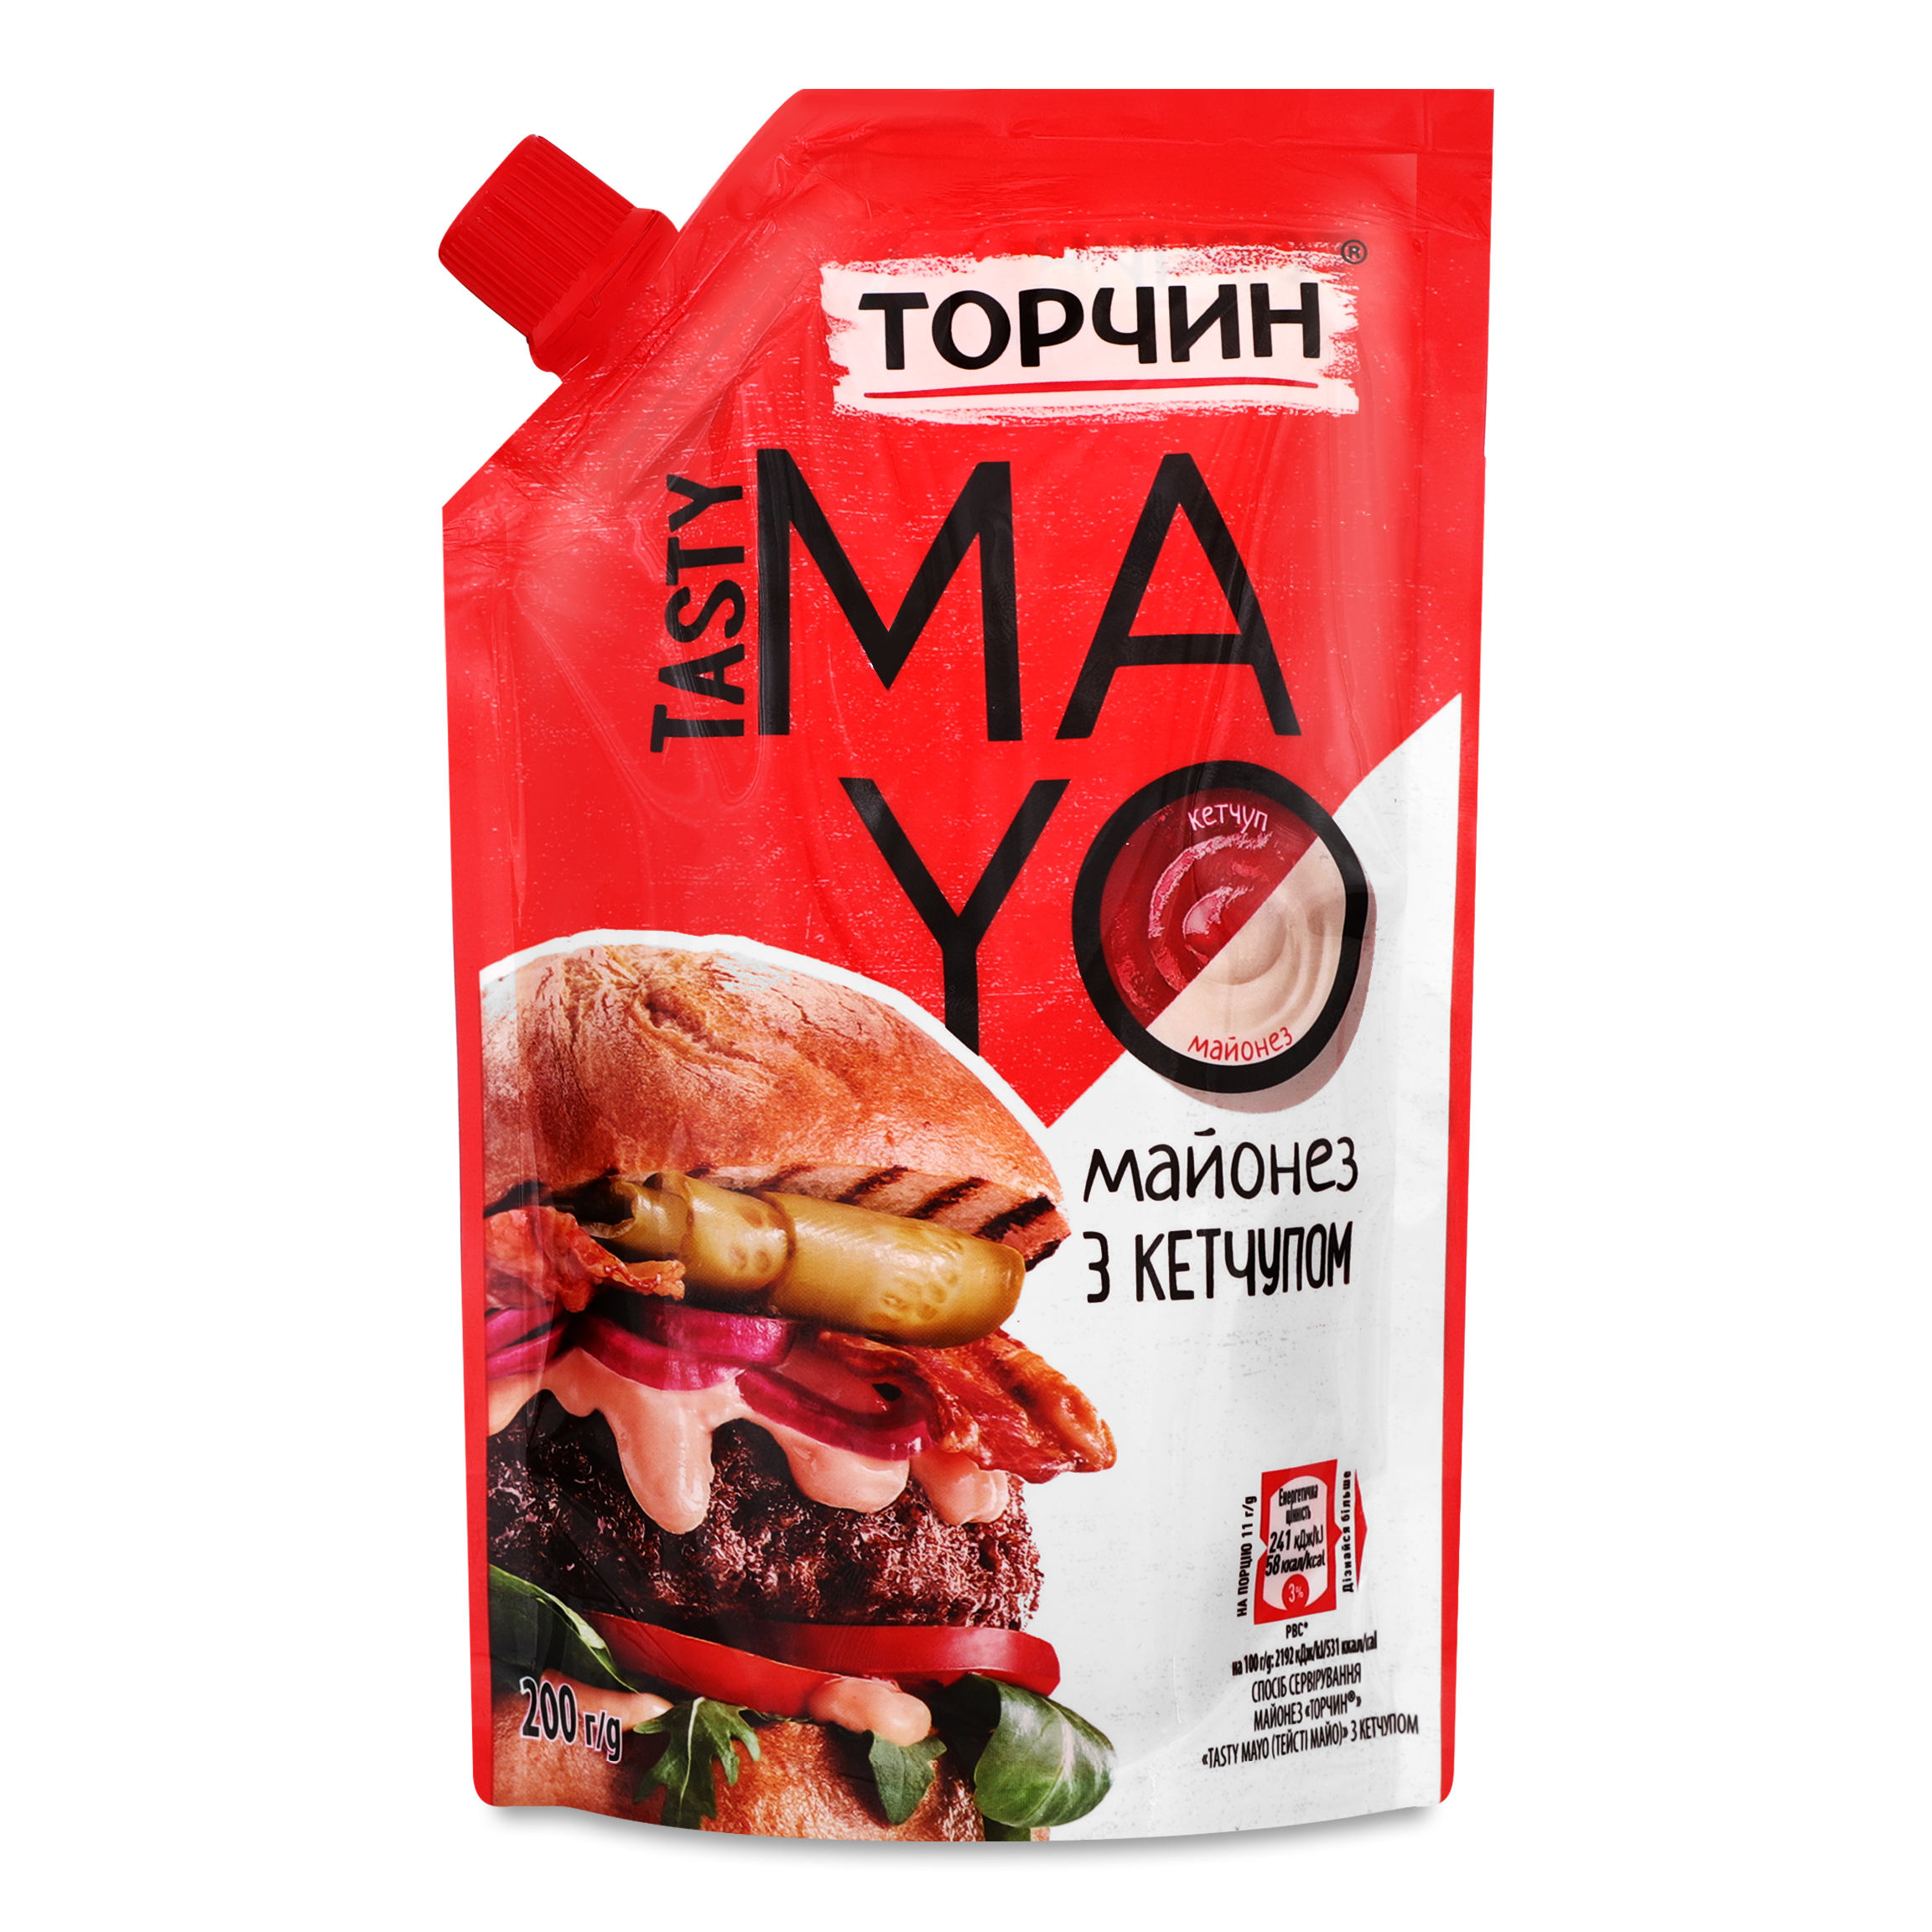 Torchyn mayonnaise Tasty Mayo with ketchup 53% 200g